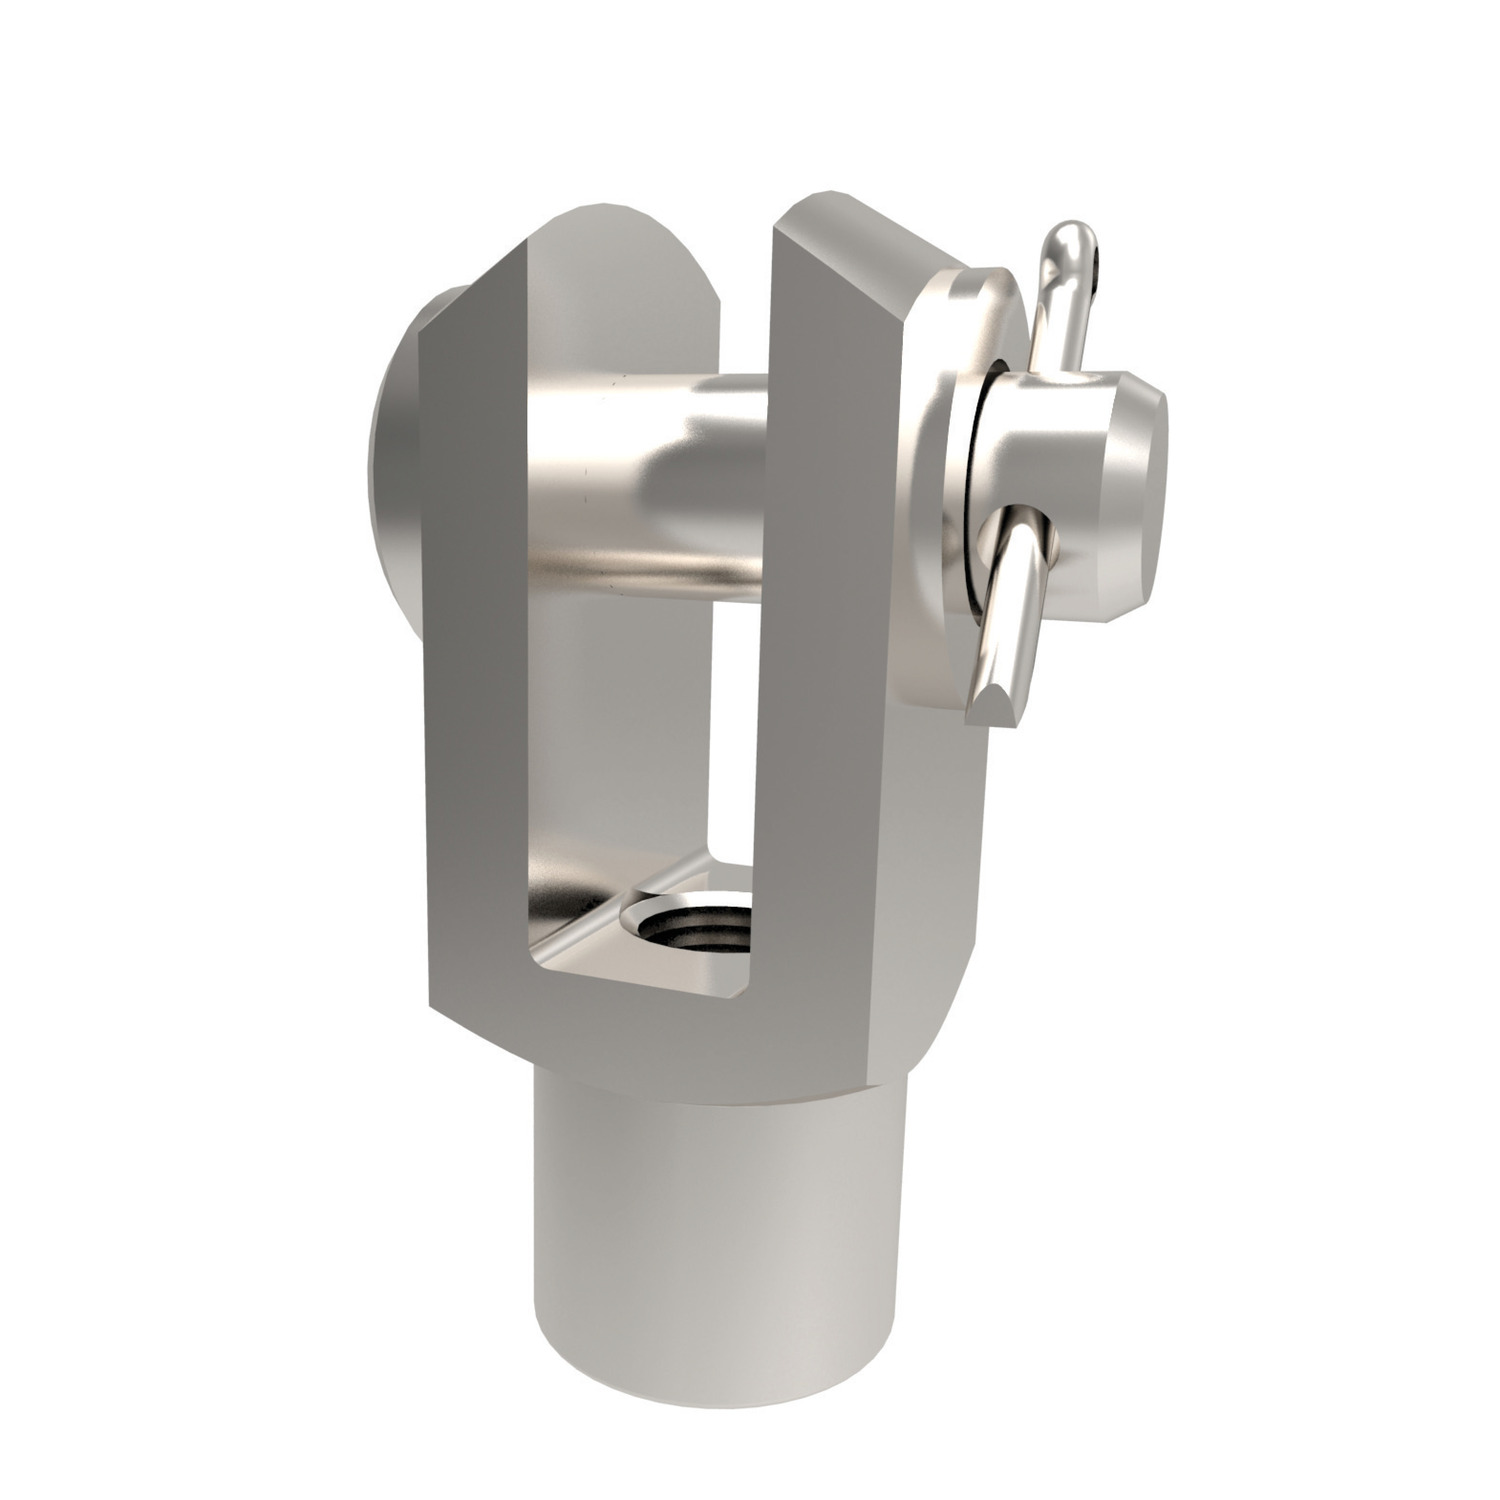 Product R3405, Stainless Clevis Joints with Pin left hand thread / 